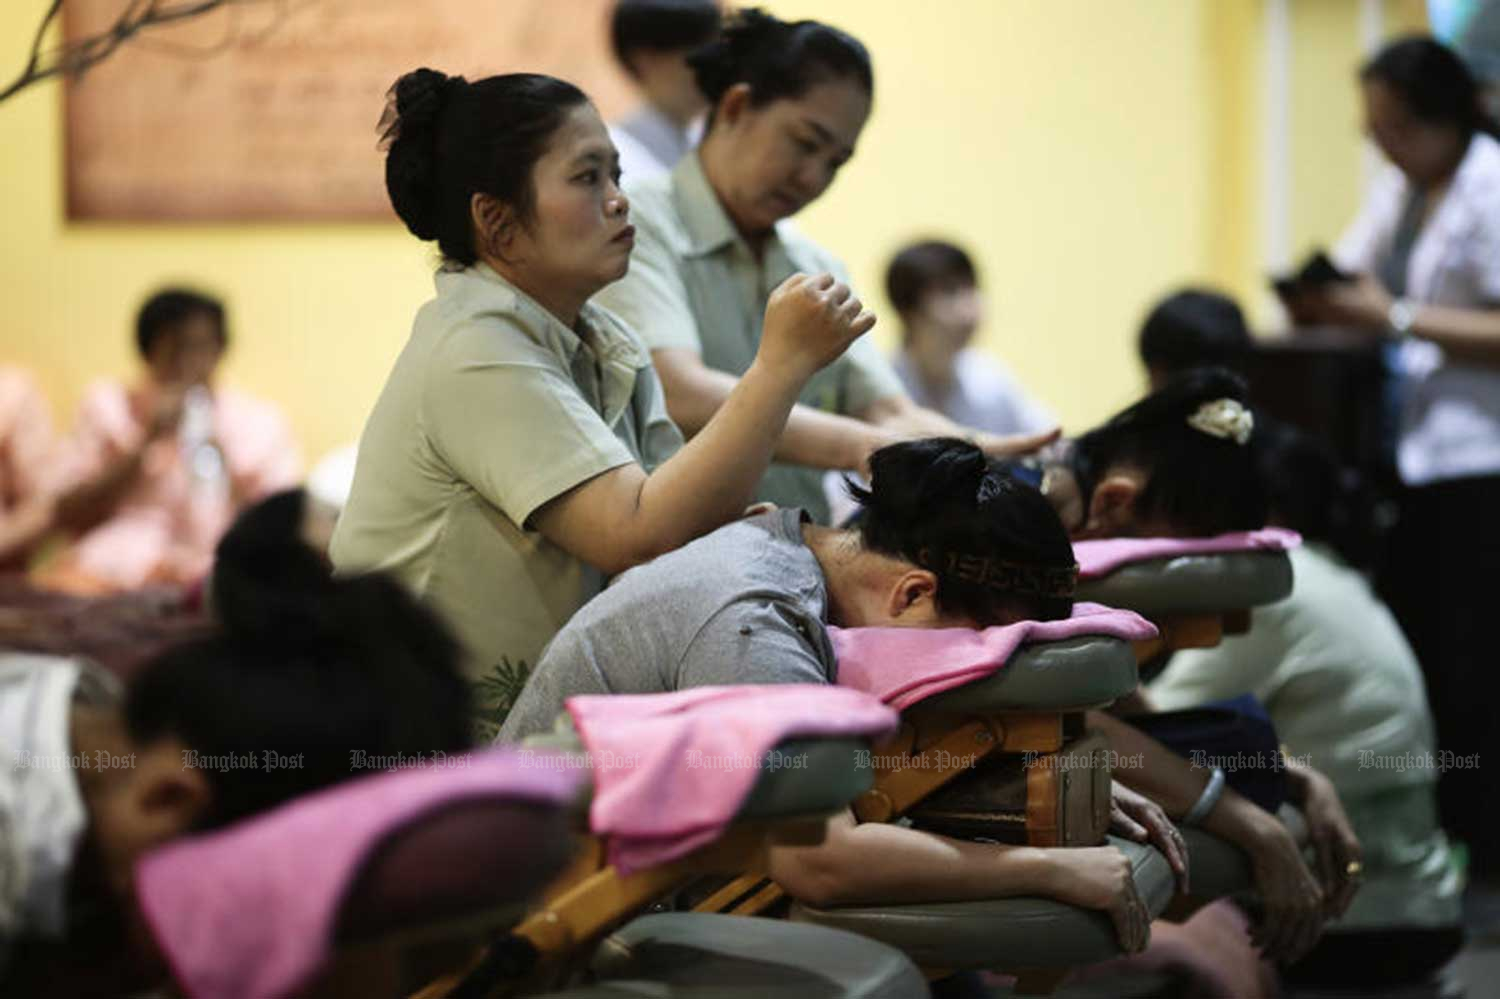 People receive massage services at the 16th National Herb Expo at Muang Thong Thani in Nonthaburi on March 6 this year. (Photo by Patipat Janthong)